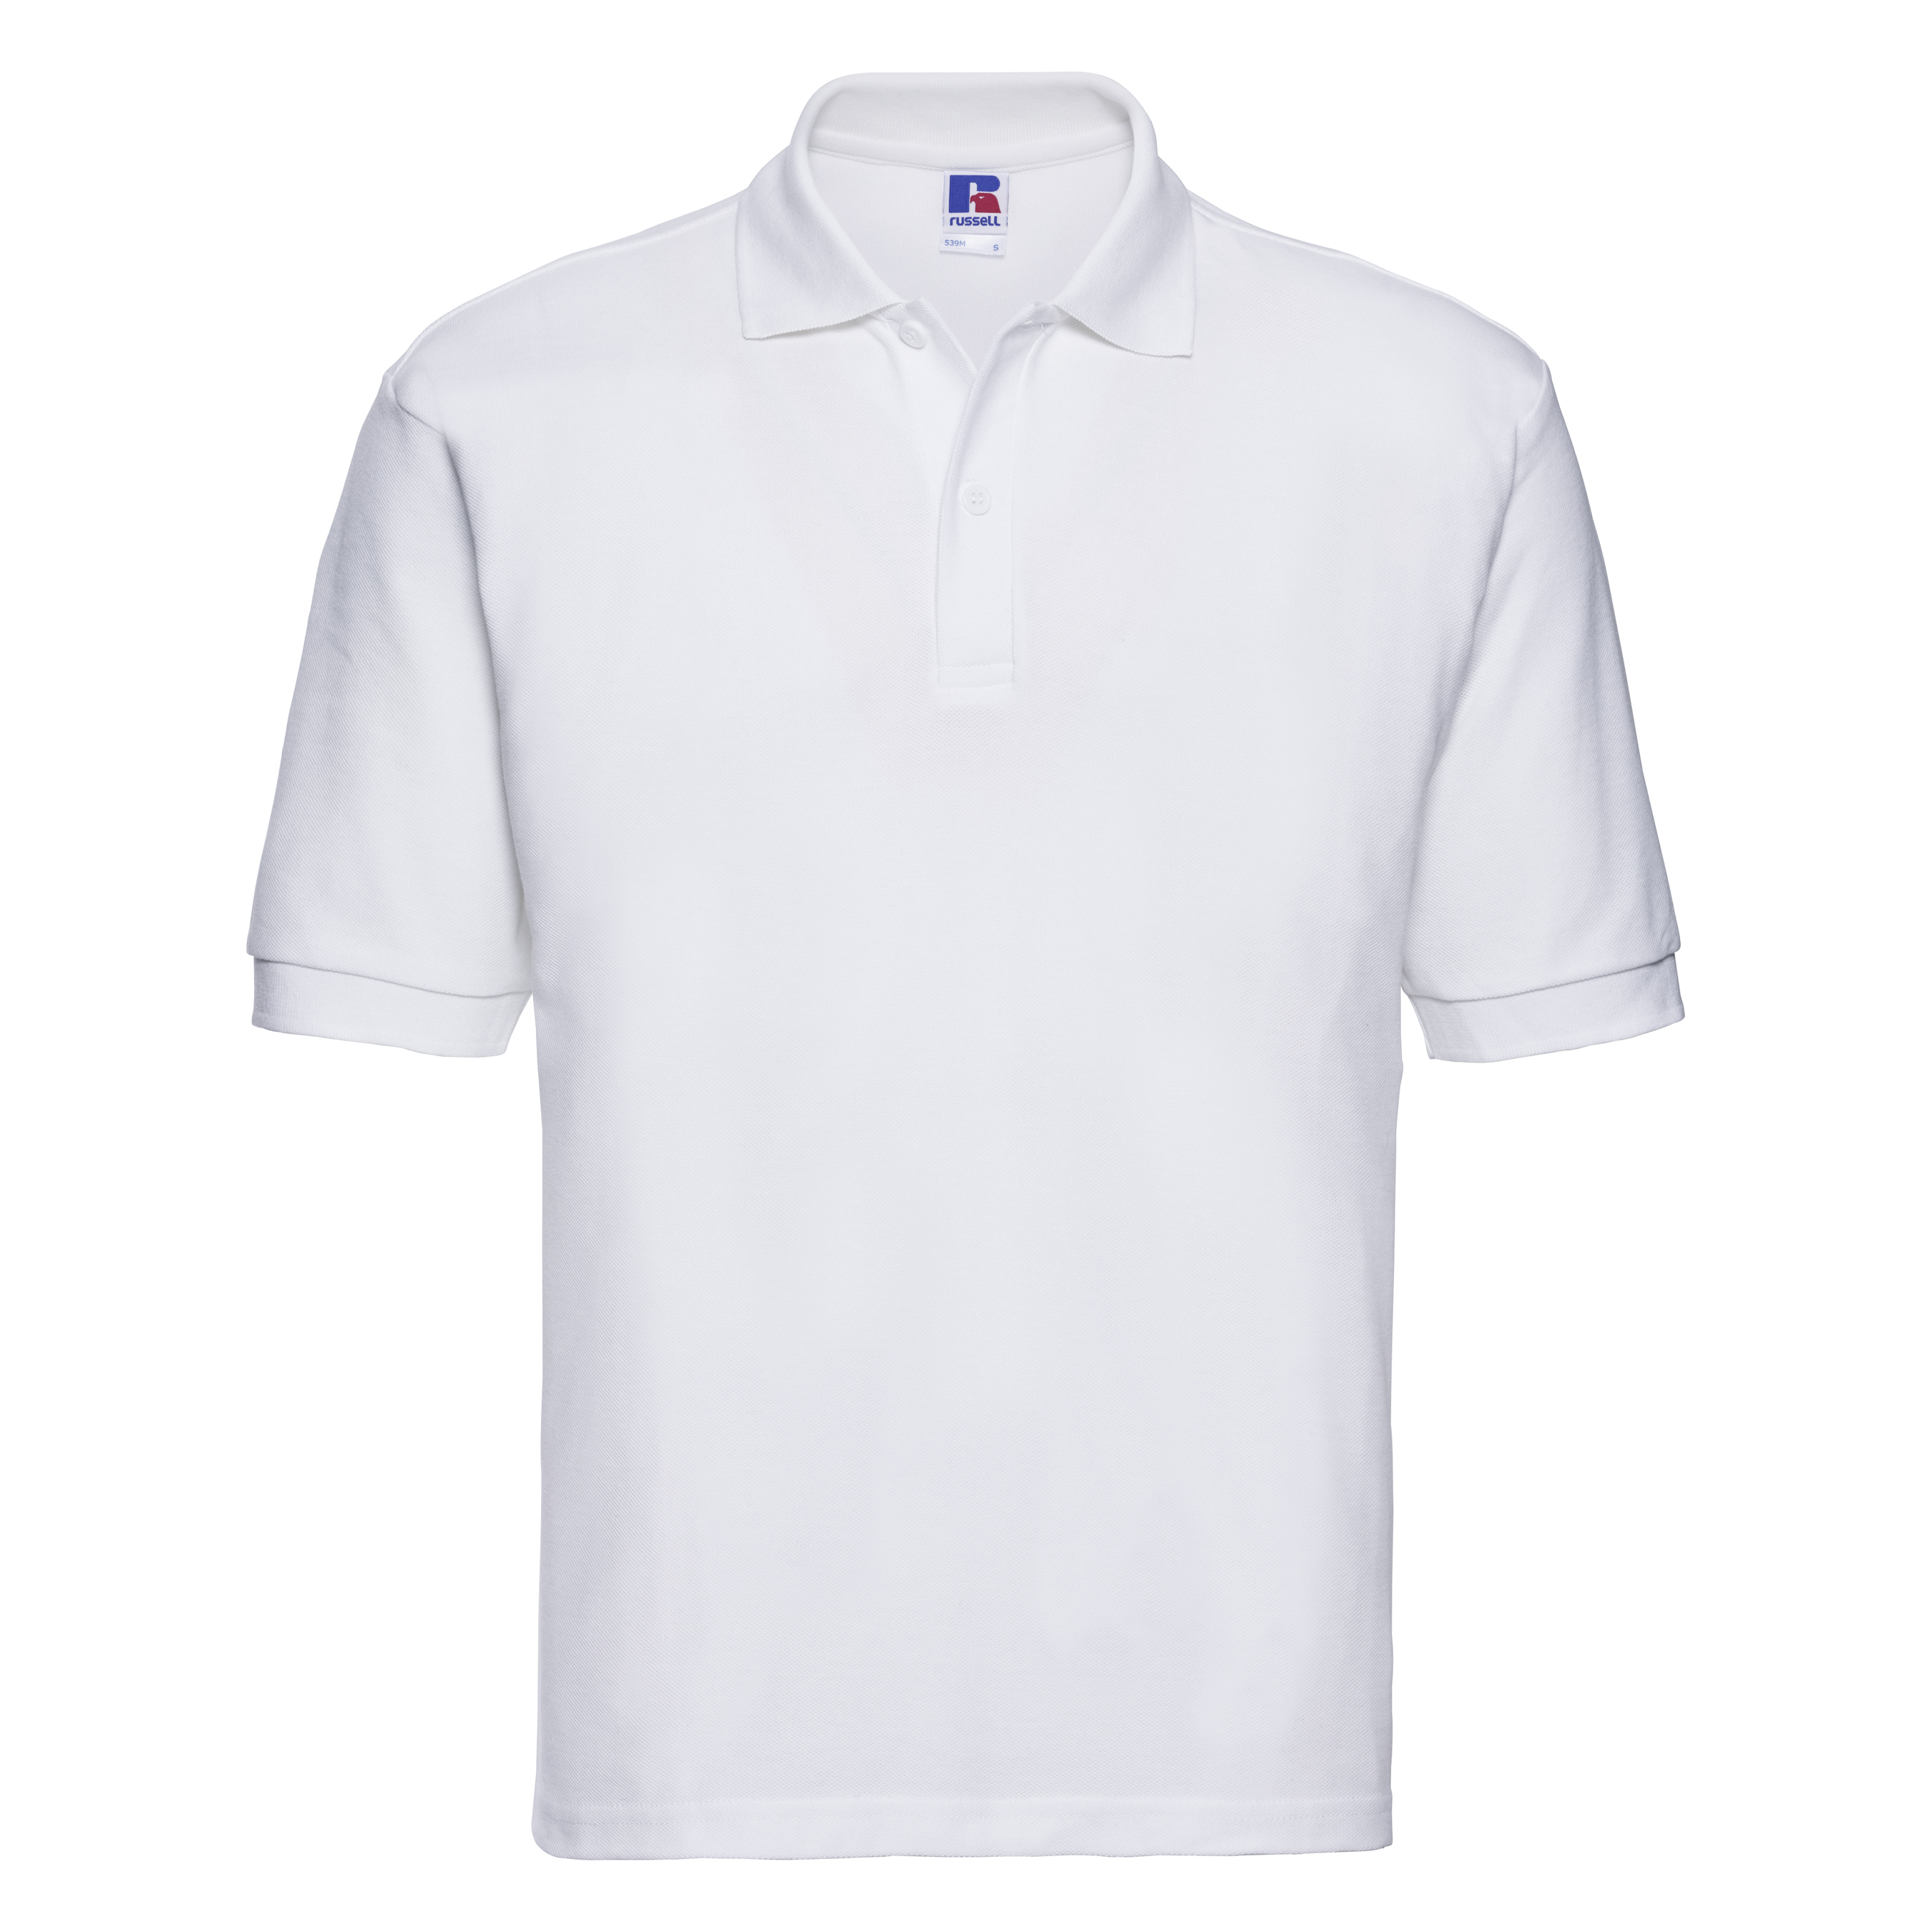 ax-httpswebsystems.s3.amazonaws.comtmp_for_downloadrussell-classic-polycotton-polo-white.jpg